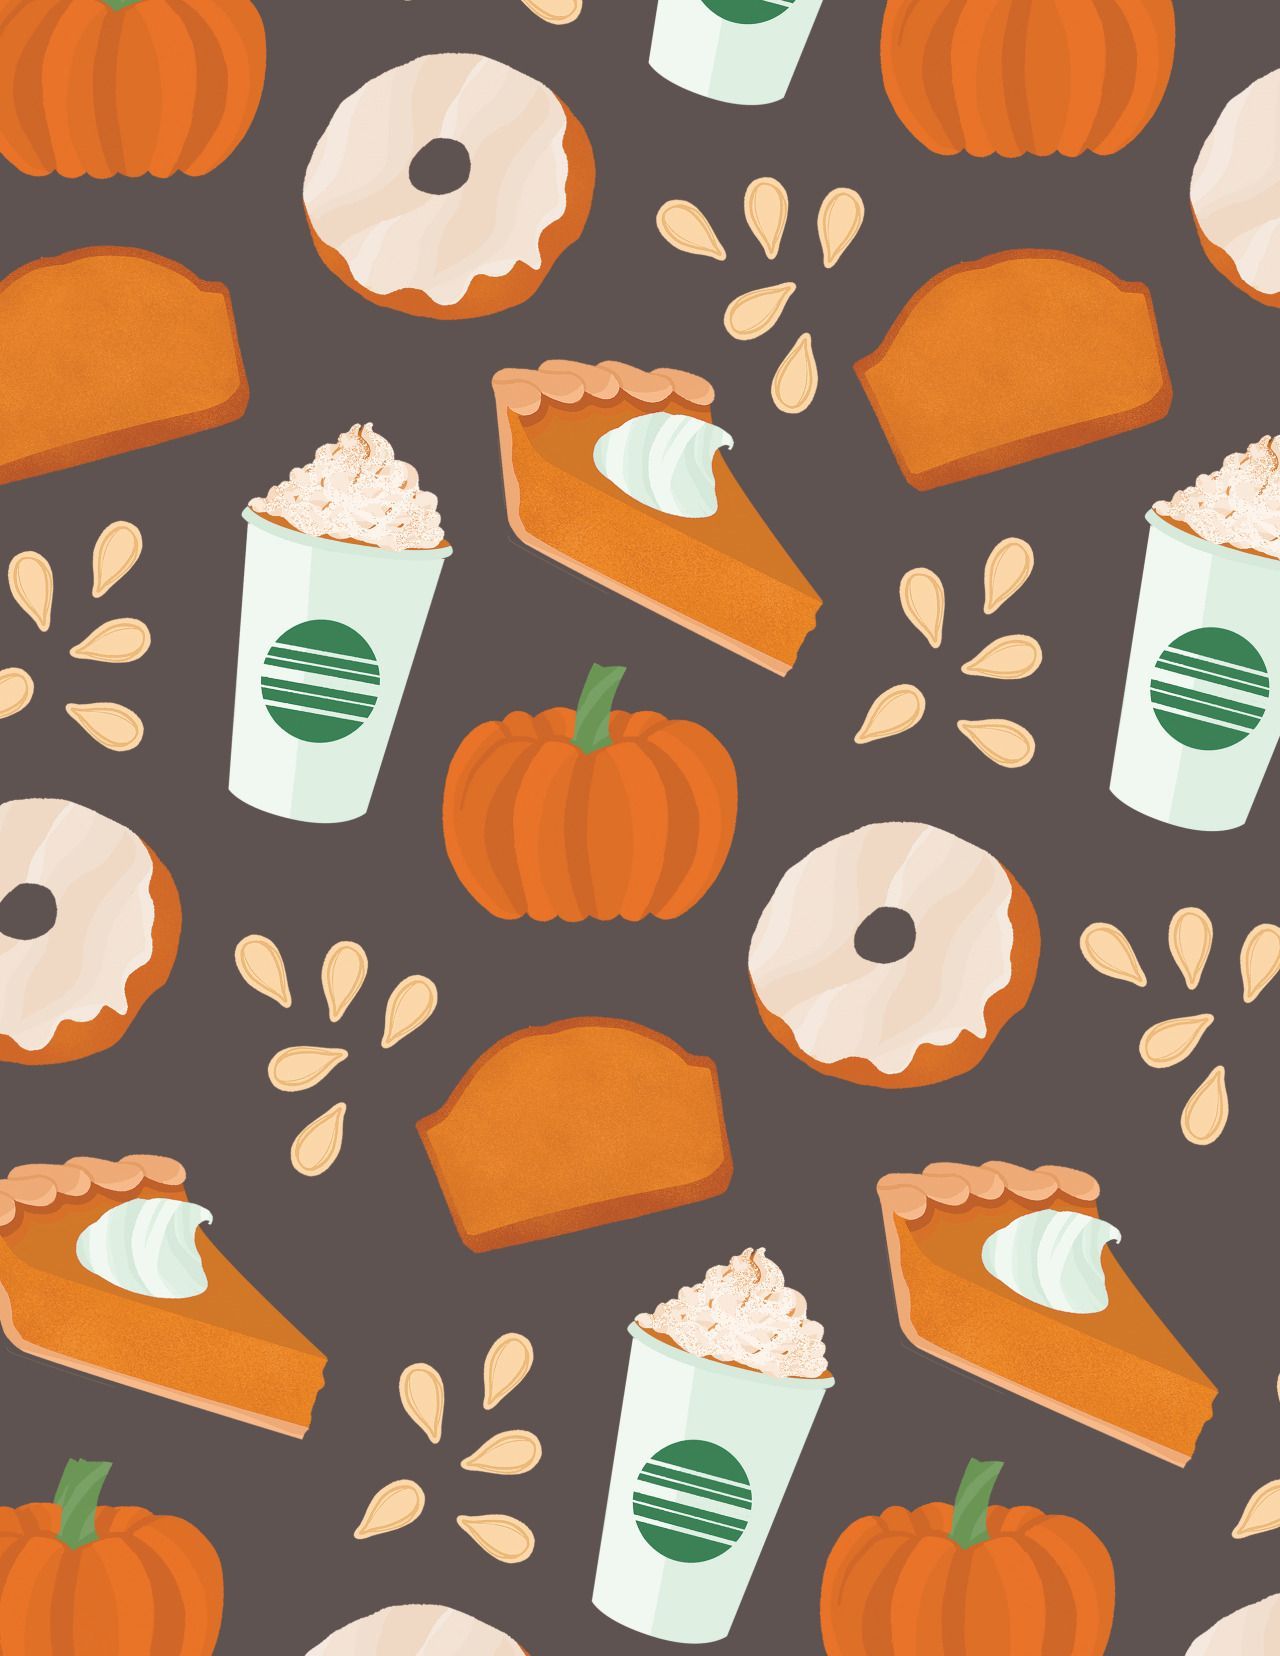 Celebrate Halloween Every Day. Fall wallpaper, Thanksgiving wallpaper, Holiday wallpaper